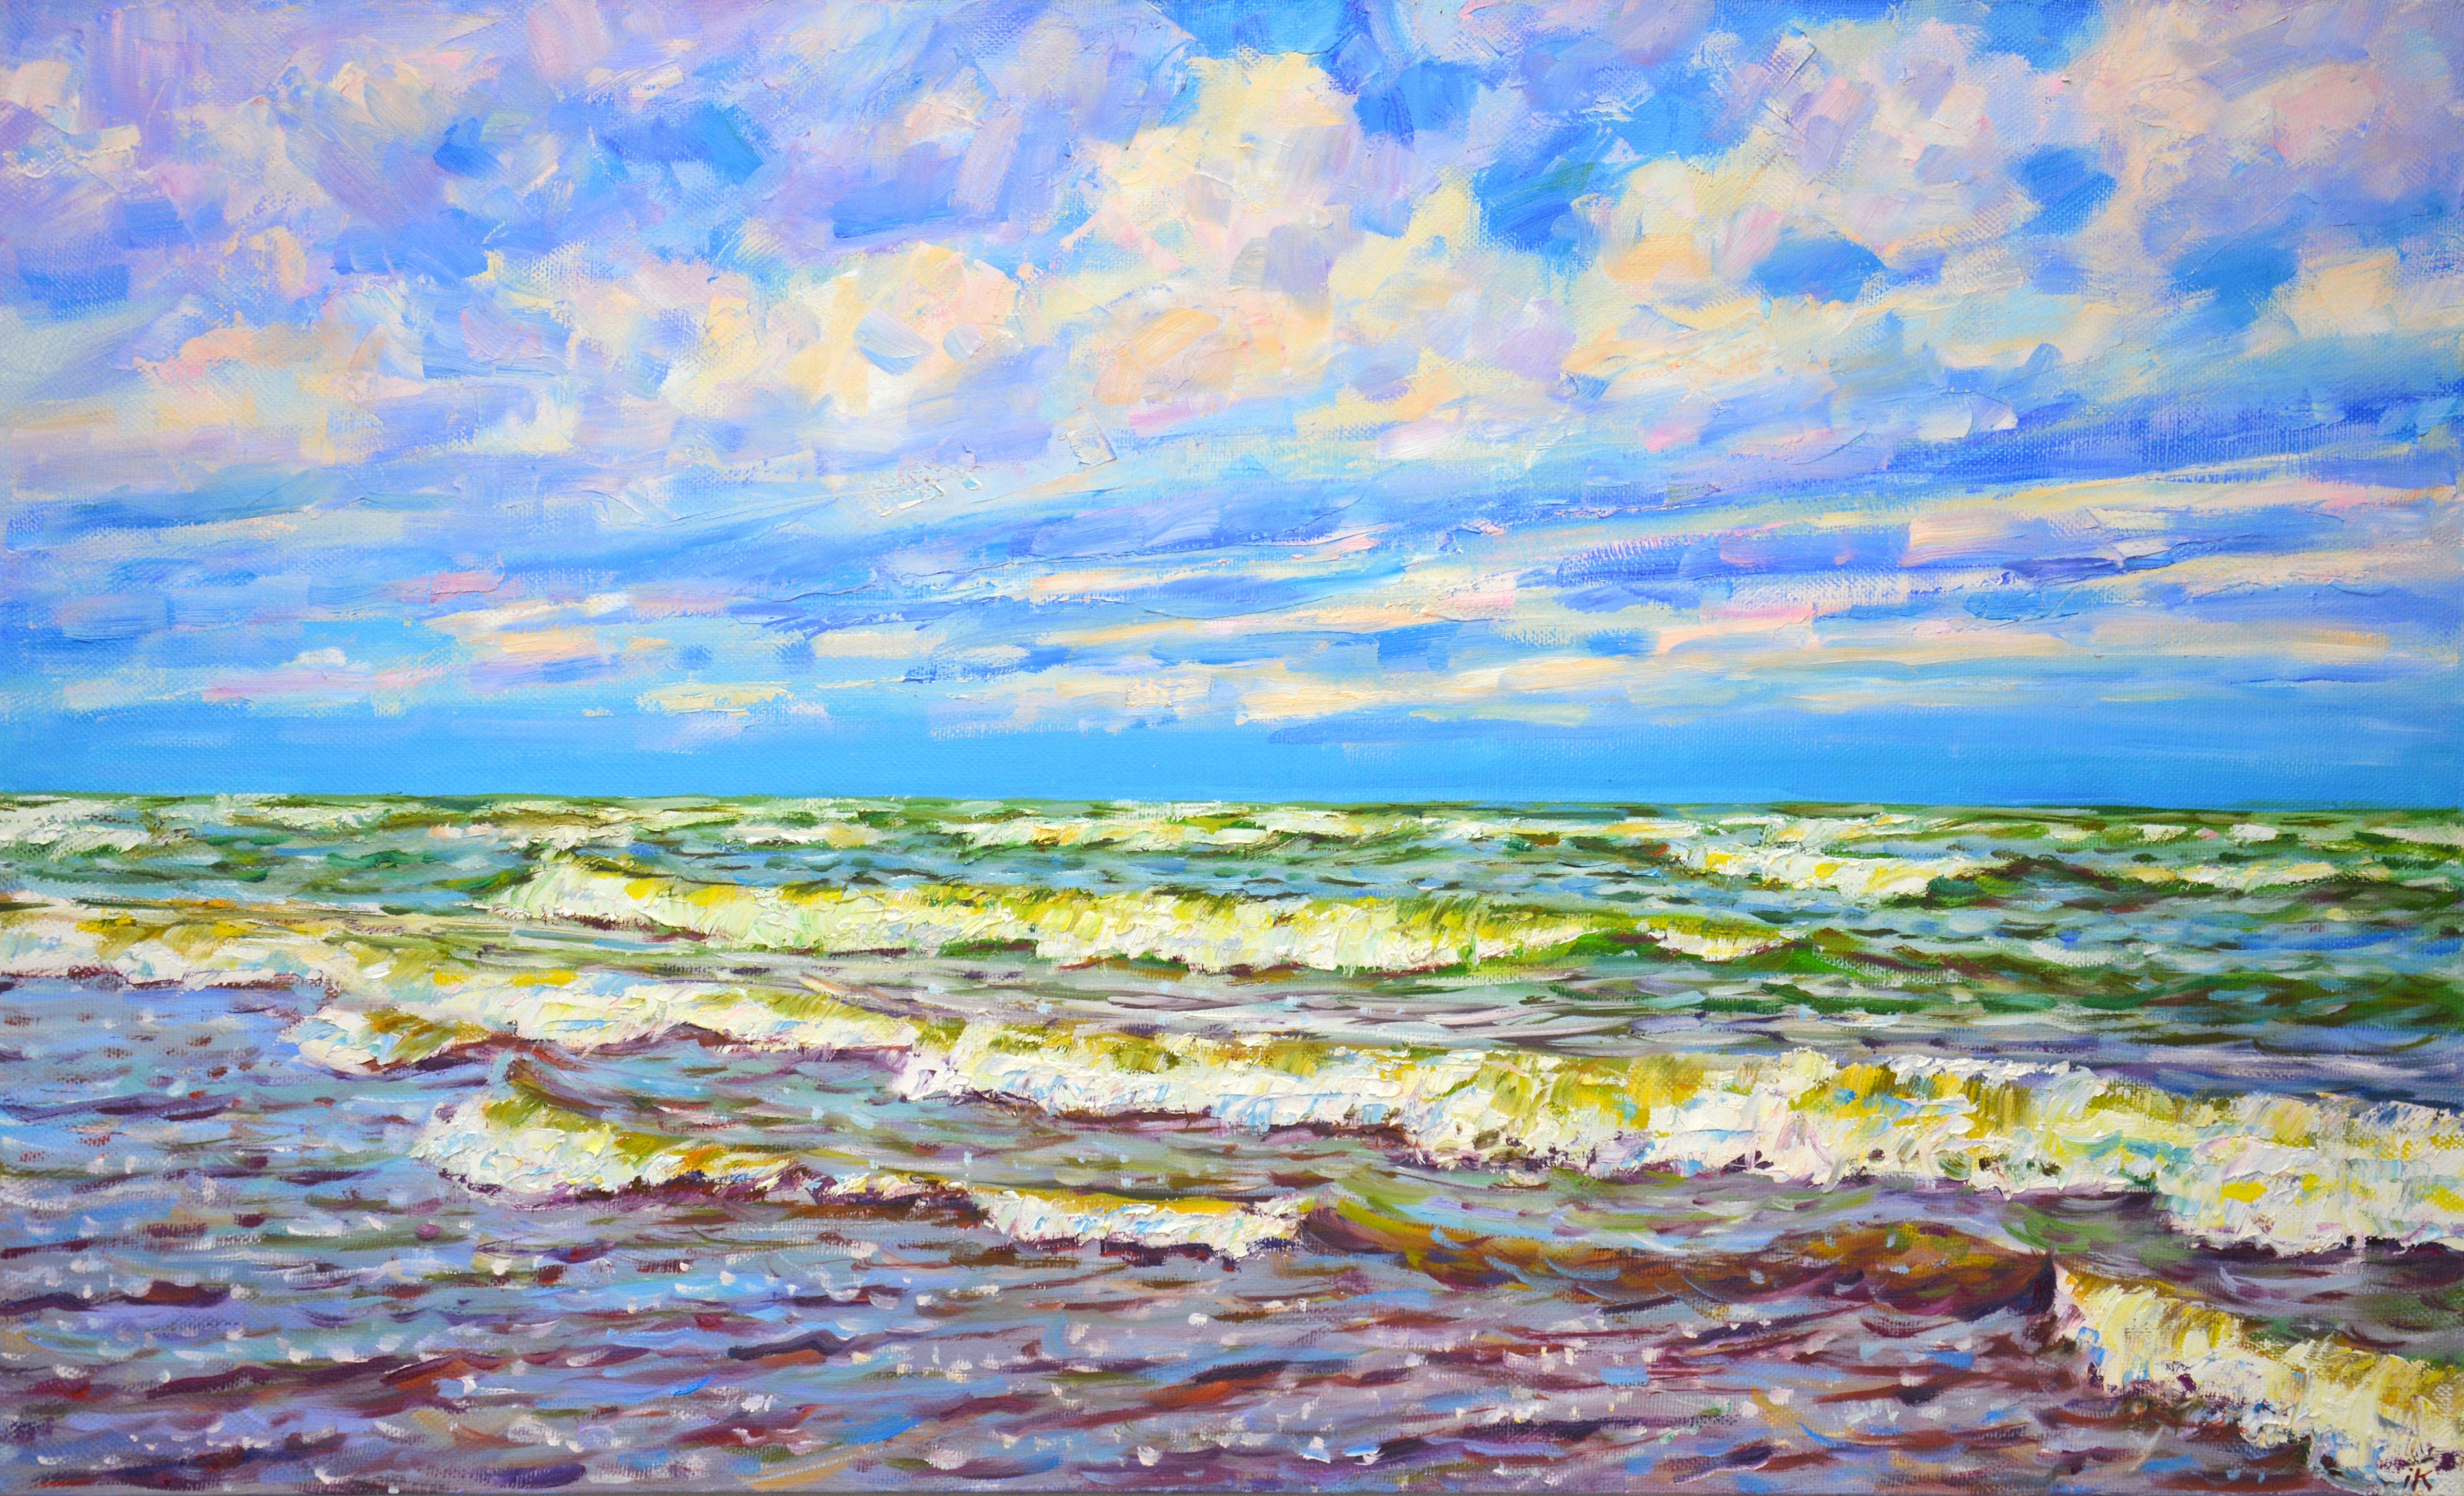 Windy day at sea. A tough knife palette and a rich blue and white palette bring out the energy of the ocean. Part of an ongoing series of seascapes. The picture has good spatial quality and the colors make children happy. Oil painting on linen